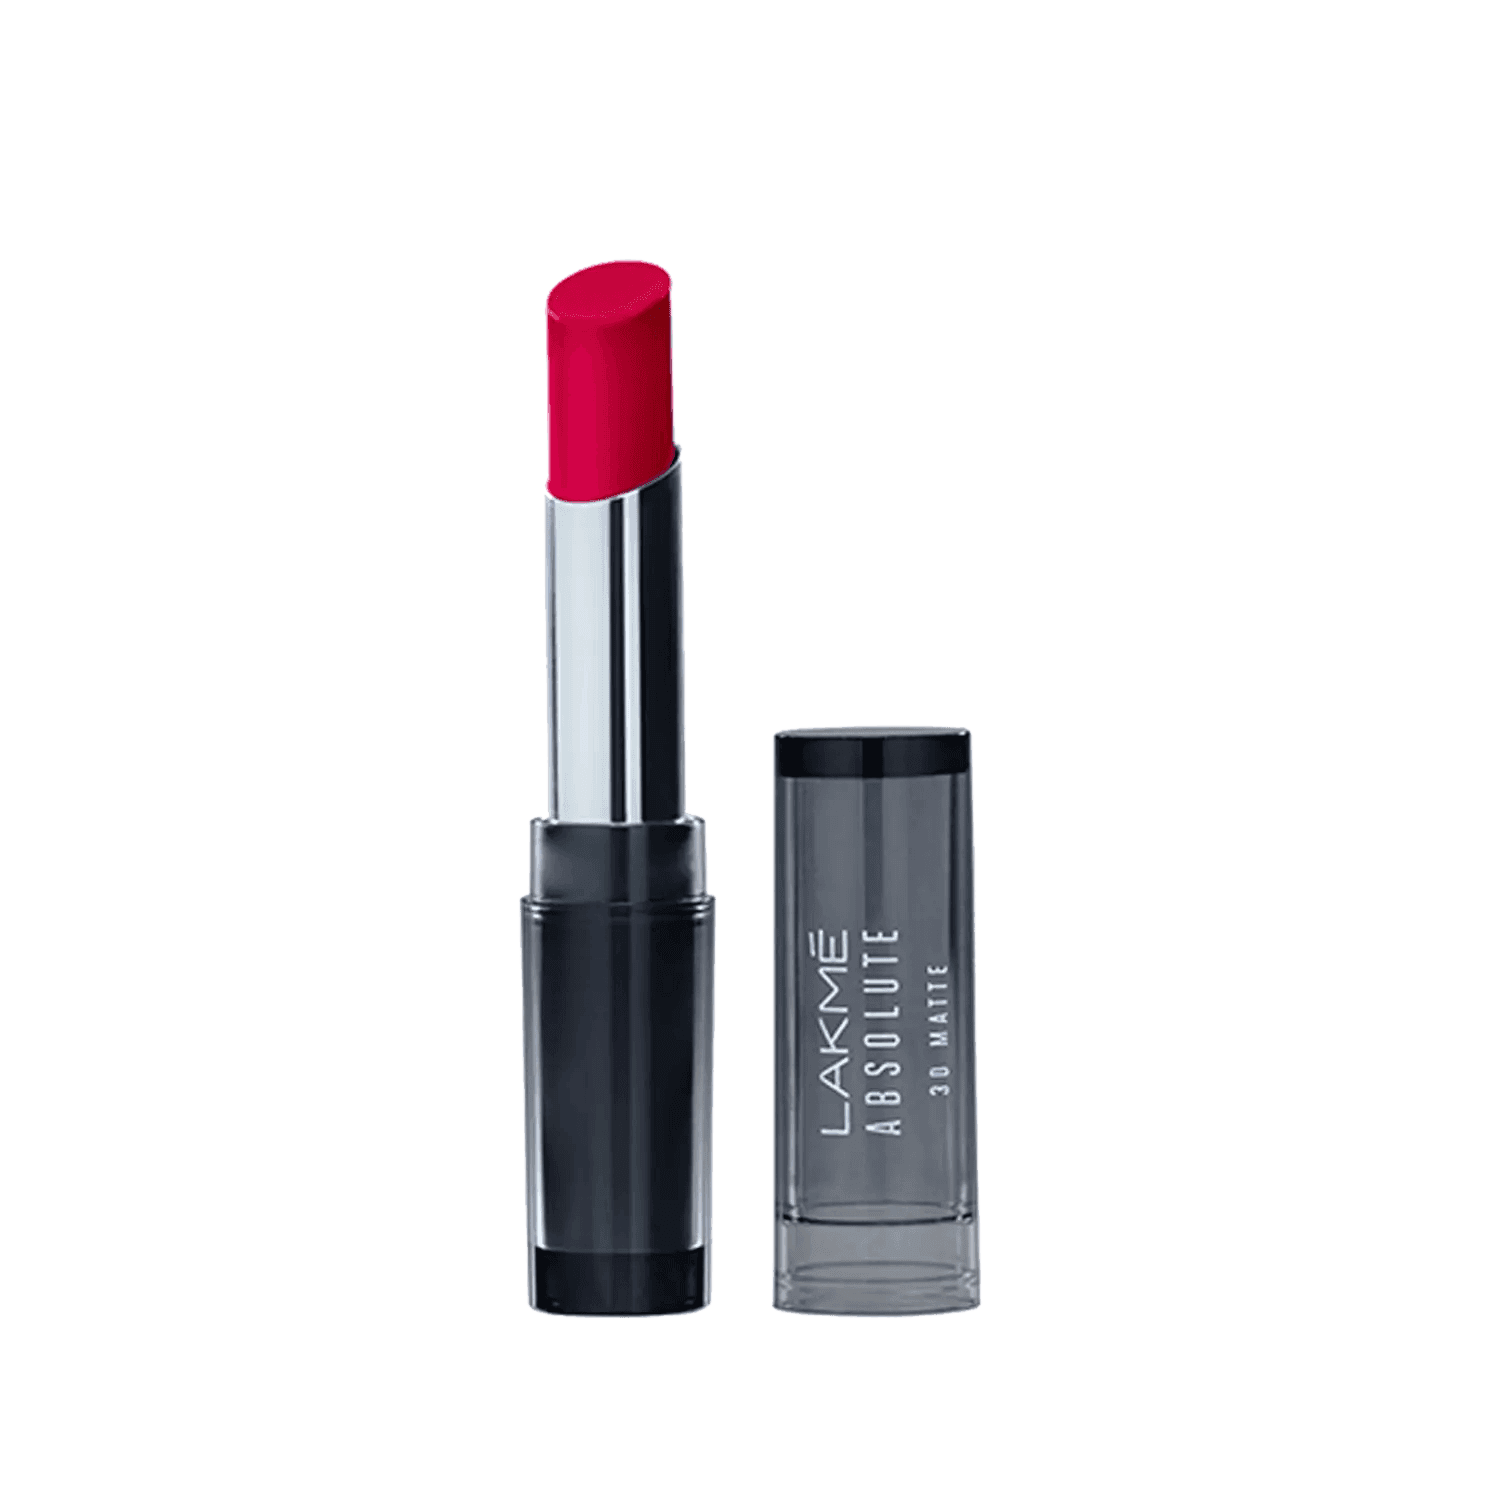 lakme absolute 3d lipstick - pink passion (3.6g)